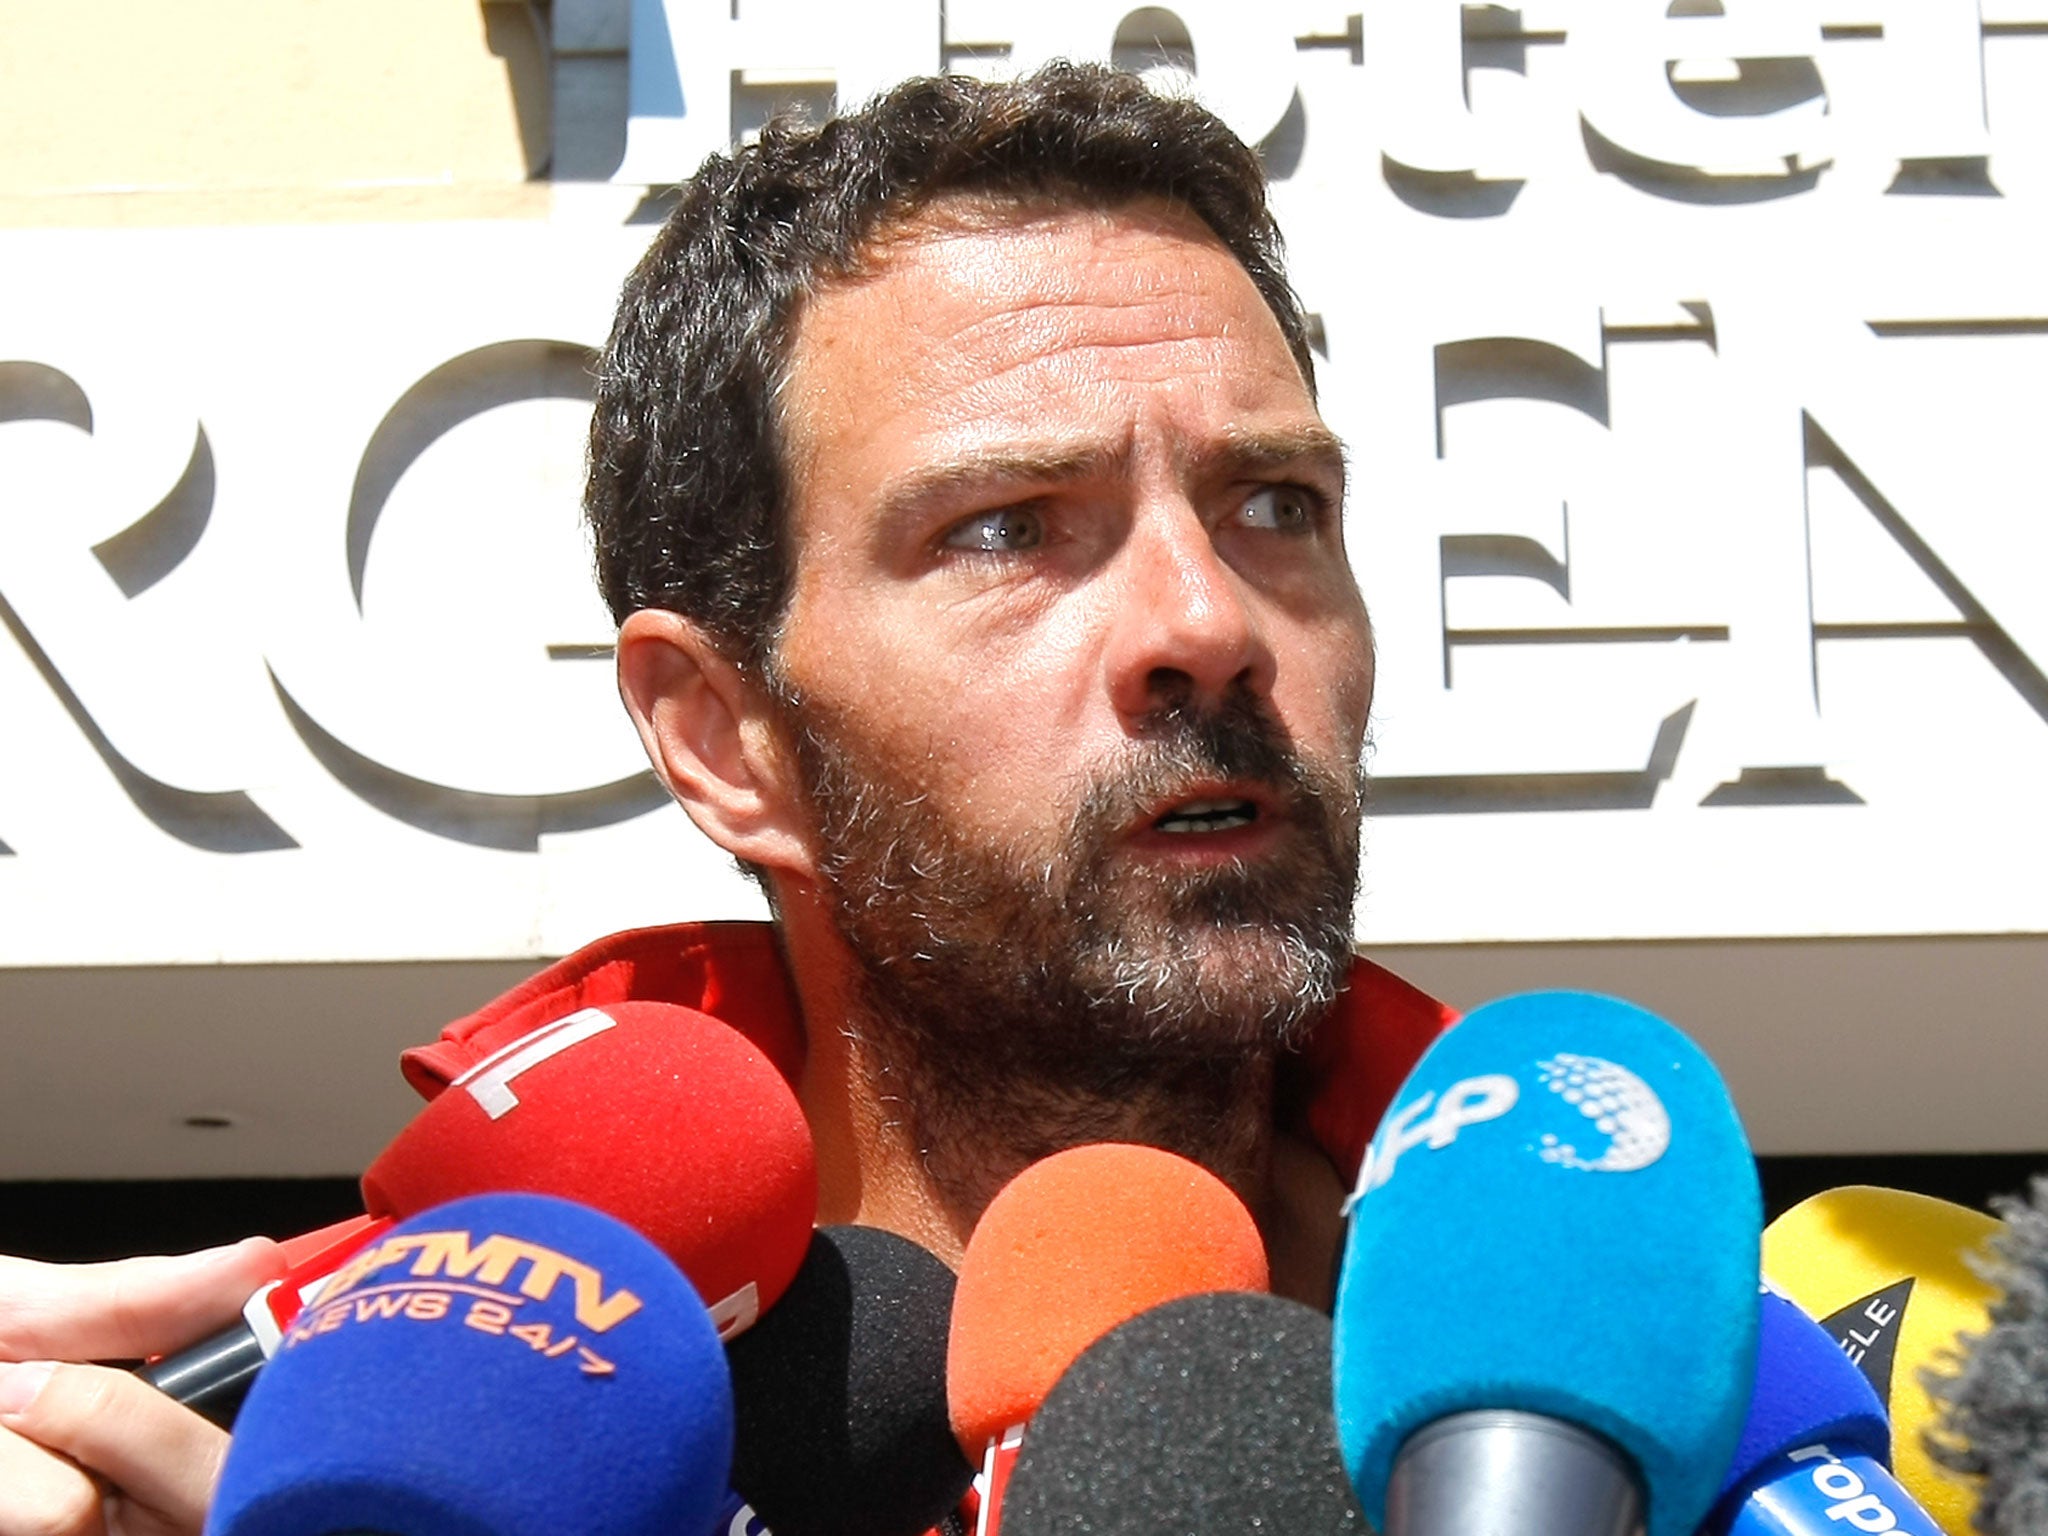 Jérôme Kerviel held a press conference a few yards inside Italy, demanding a meeting with the French President